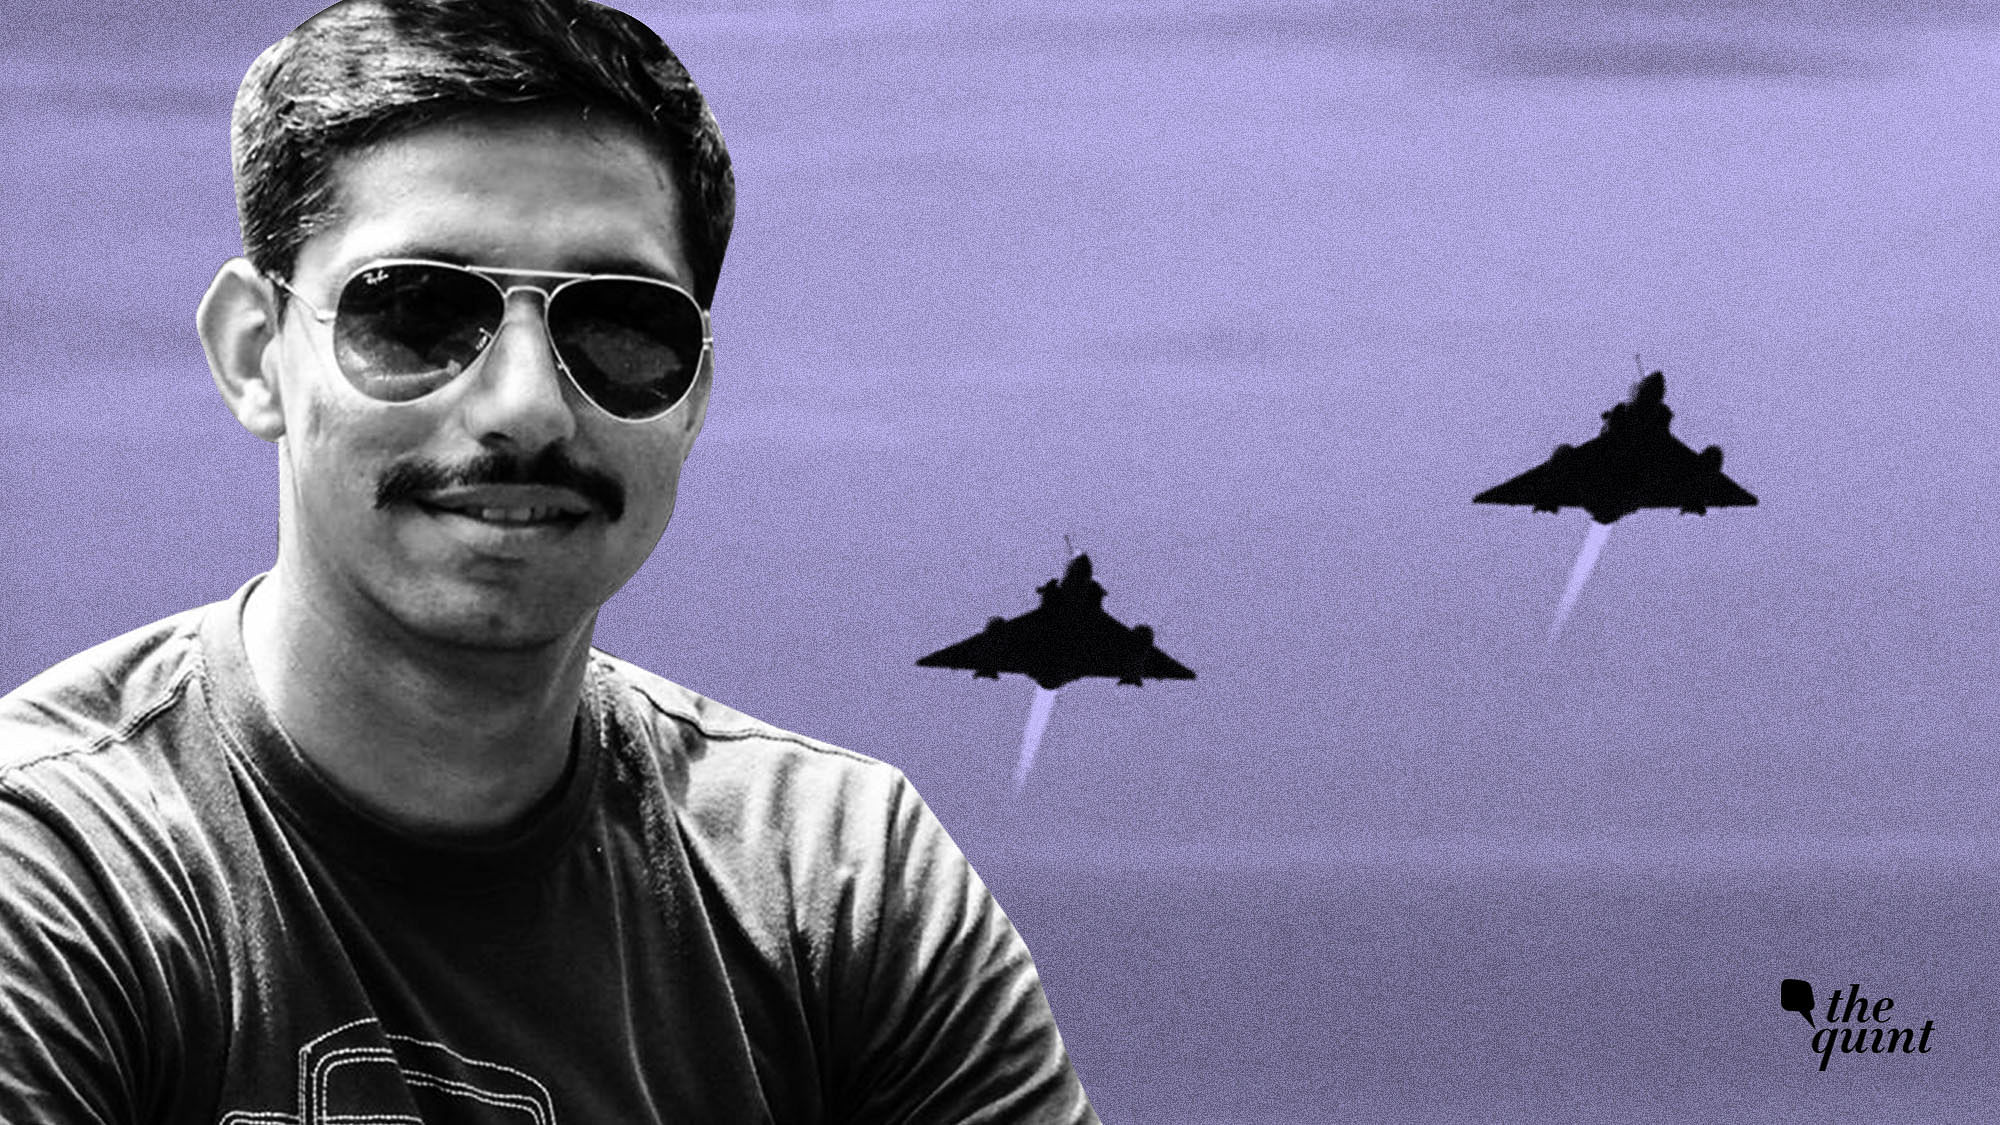 Squadron leader Samir Abrol died in the Mirage 2000 aircraft crash on Friday, 1 February.